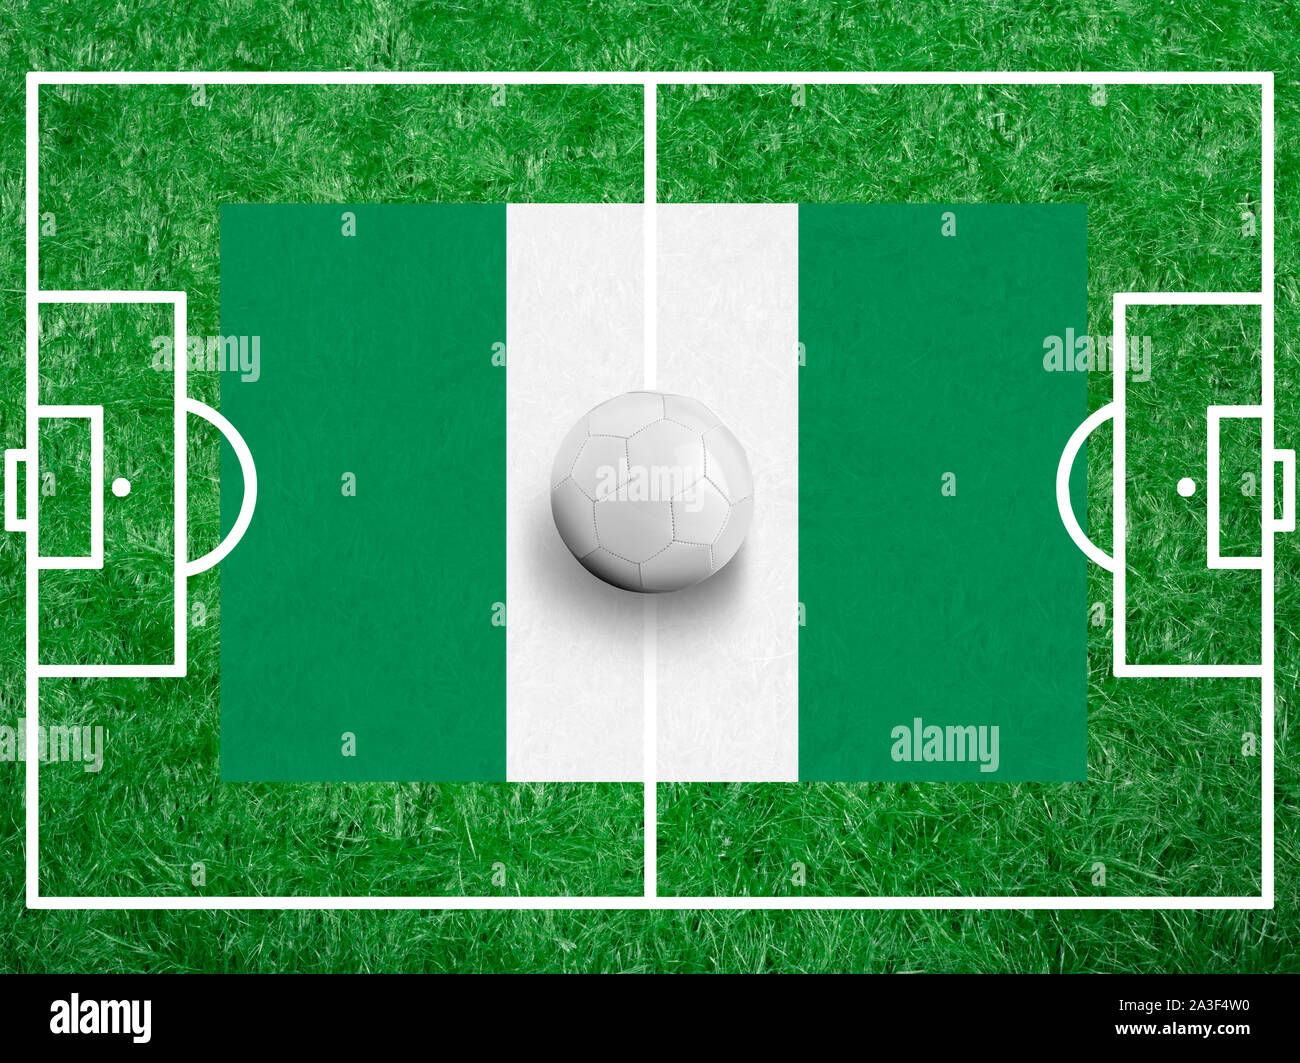 Page 6 - Nigeria Game High Resolution Stock Photography and Images - Alamy